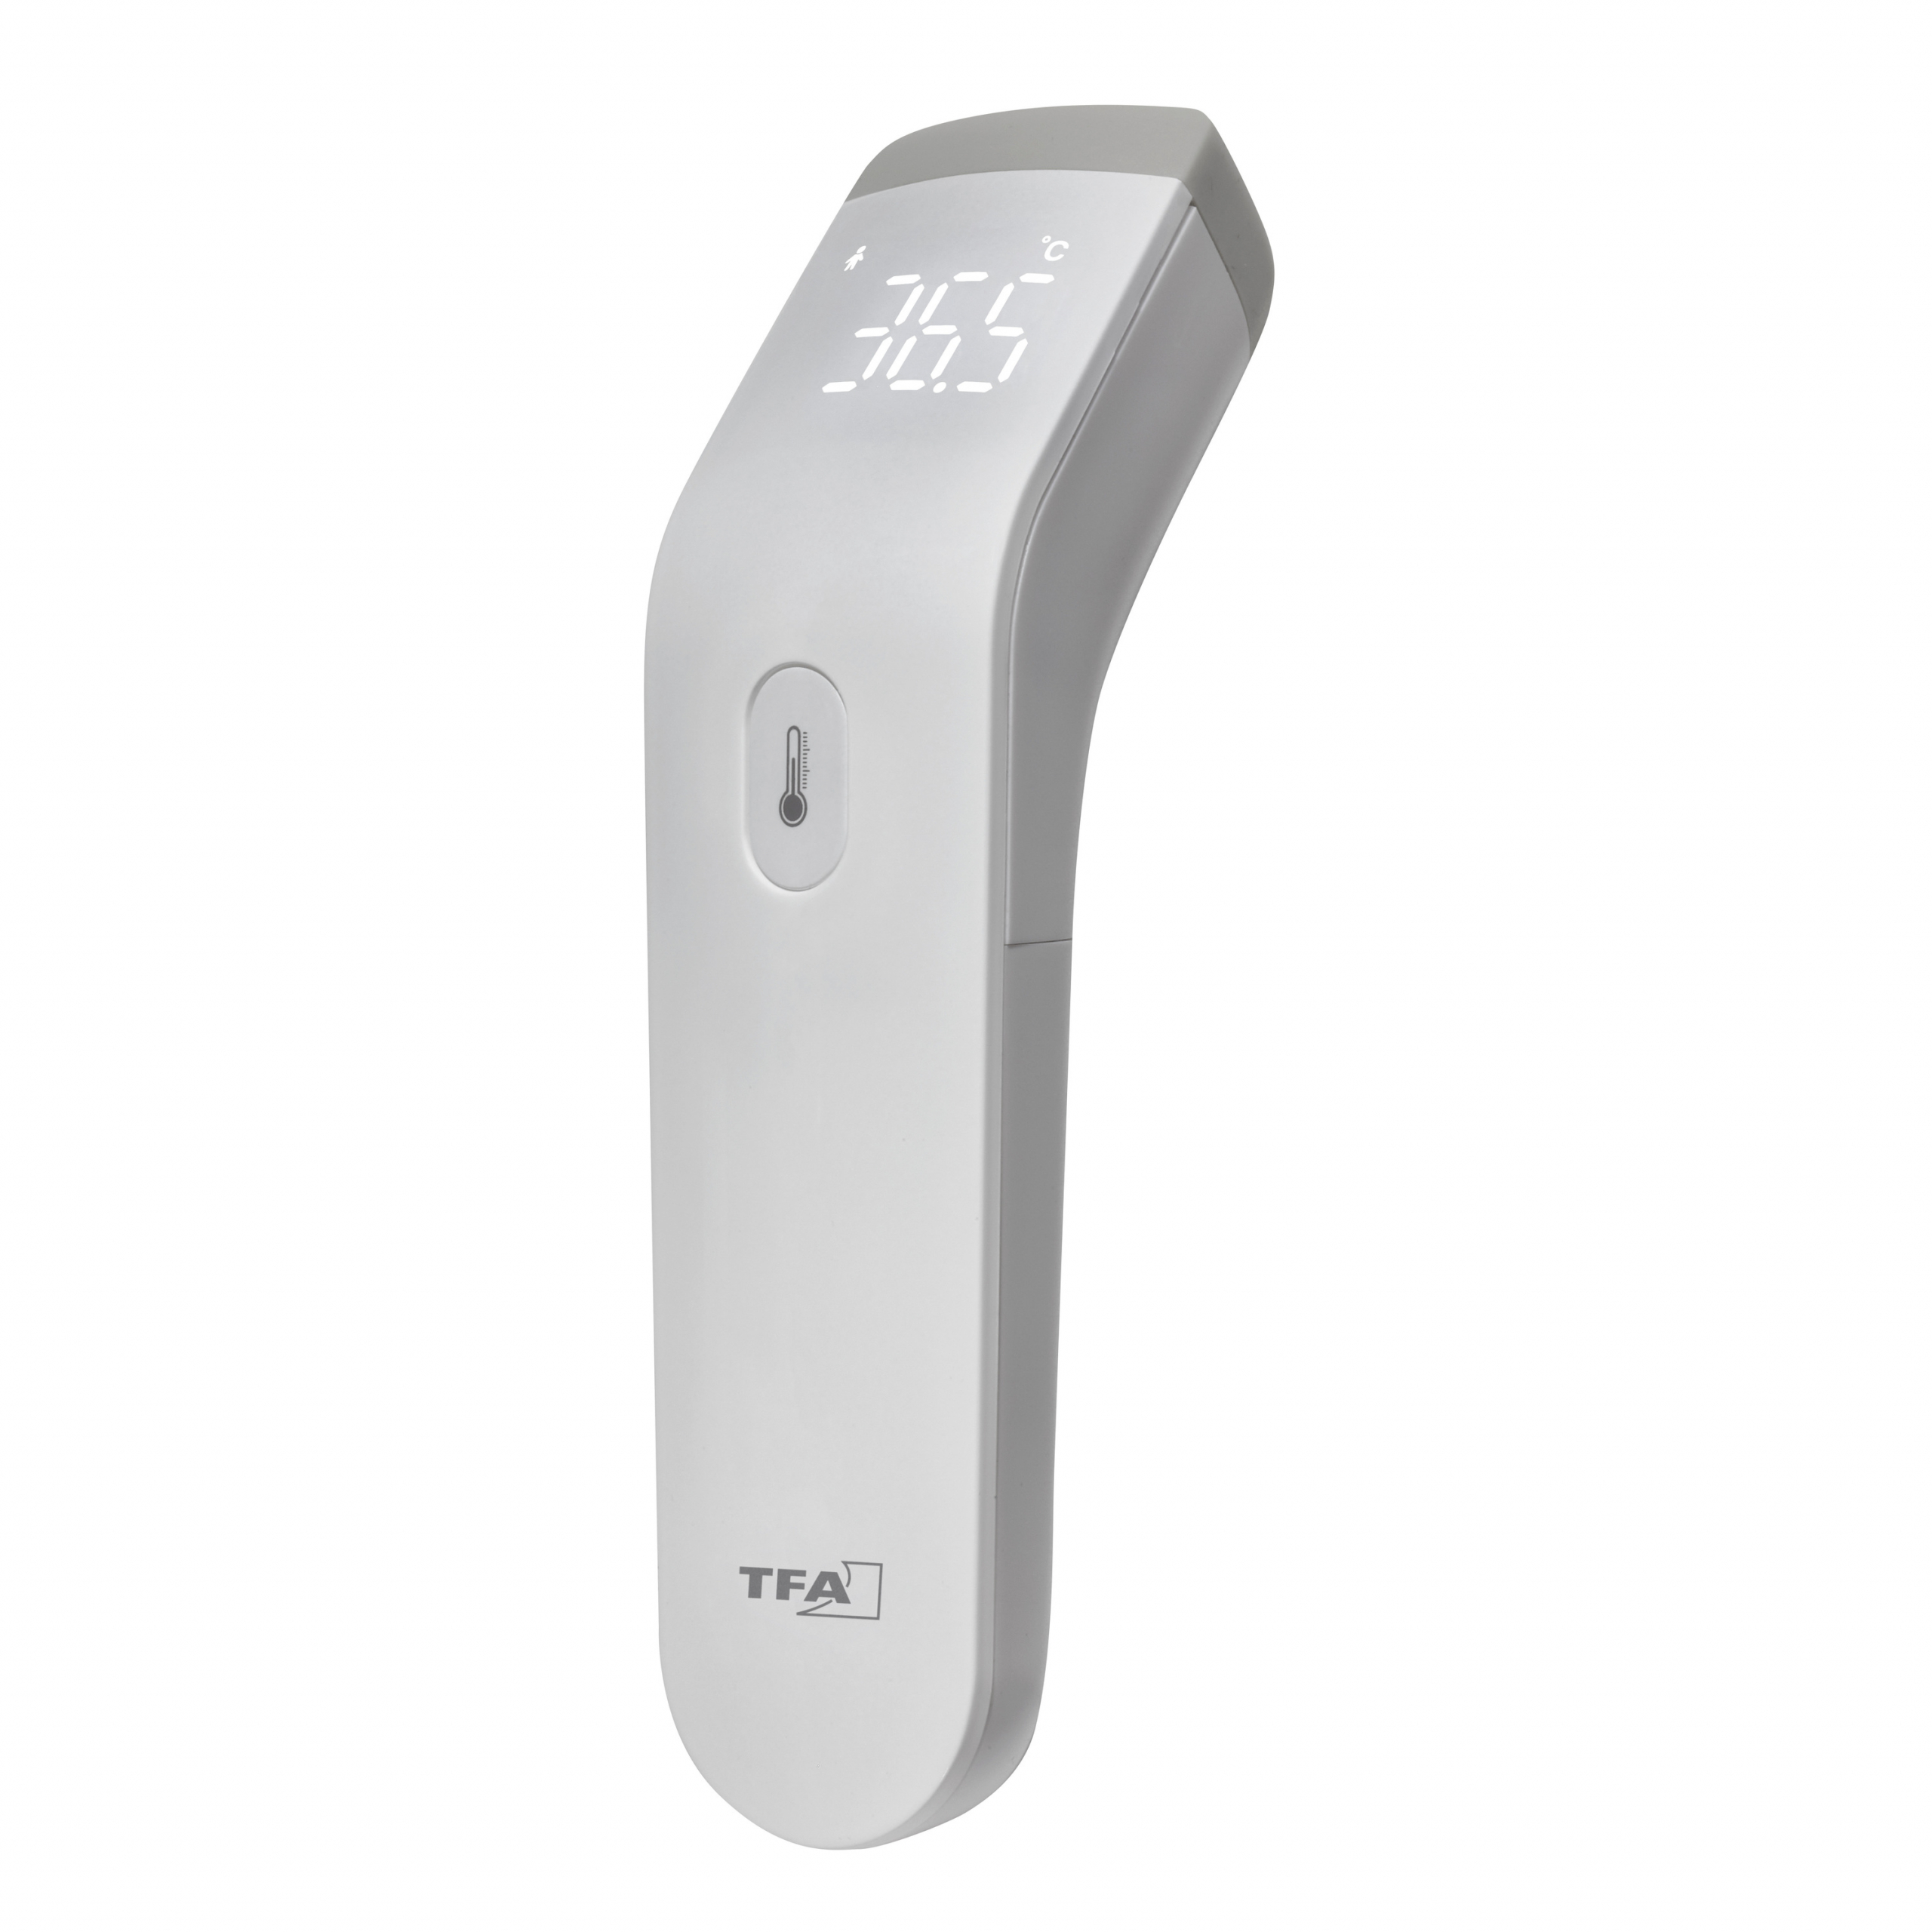 Infrared medical thermometer